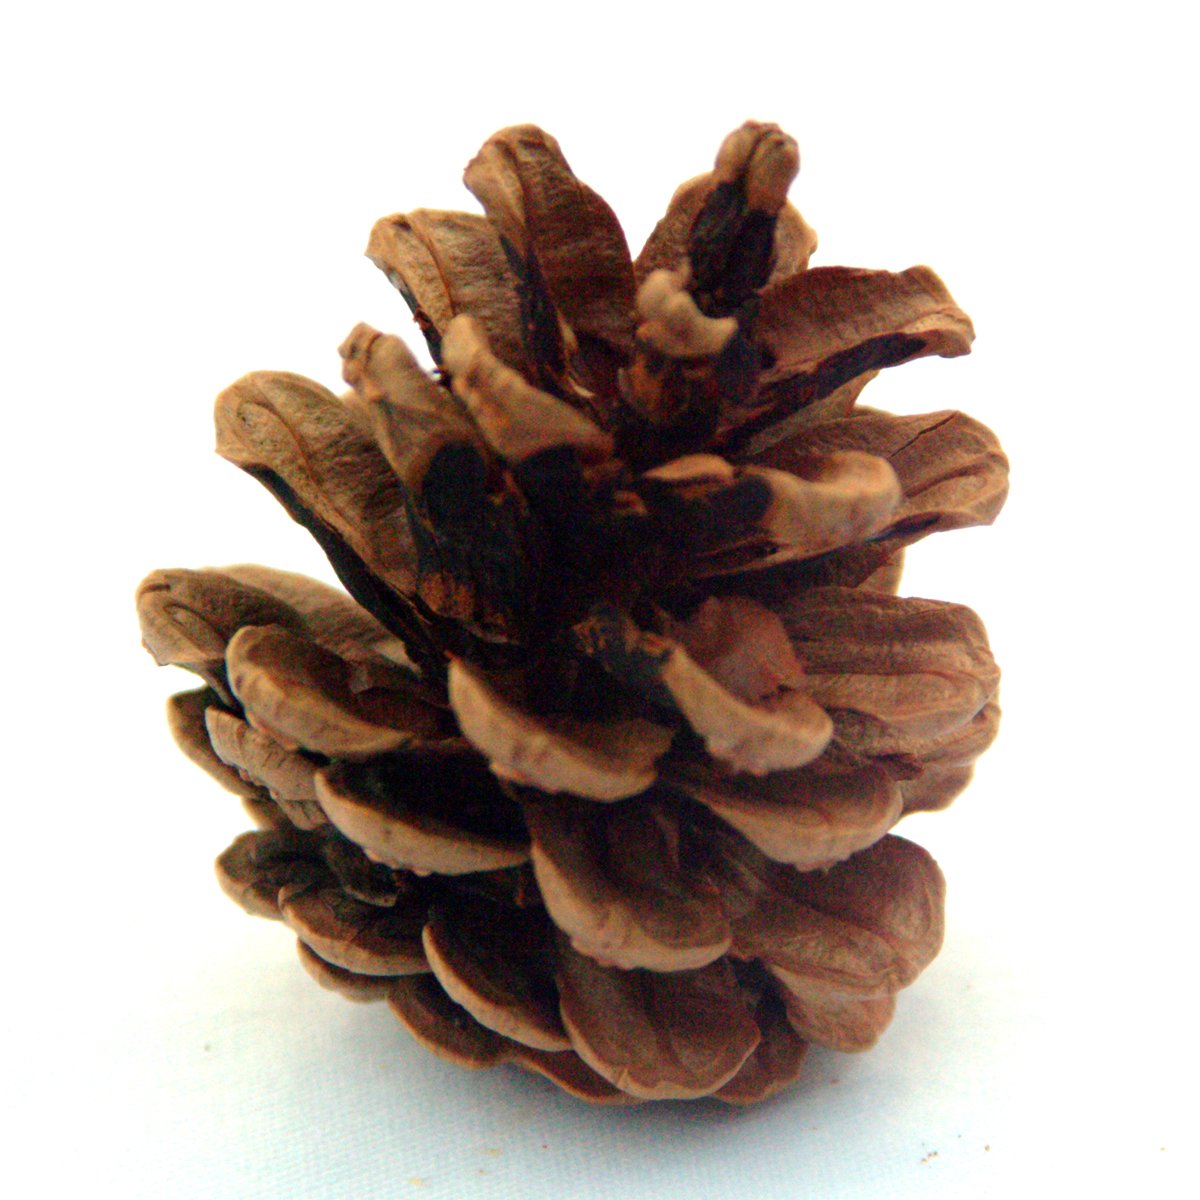 a close up po of a pine cone on a white background